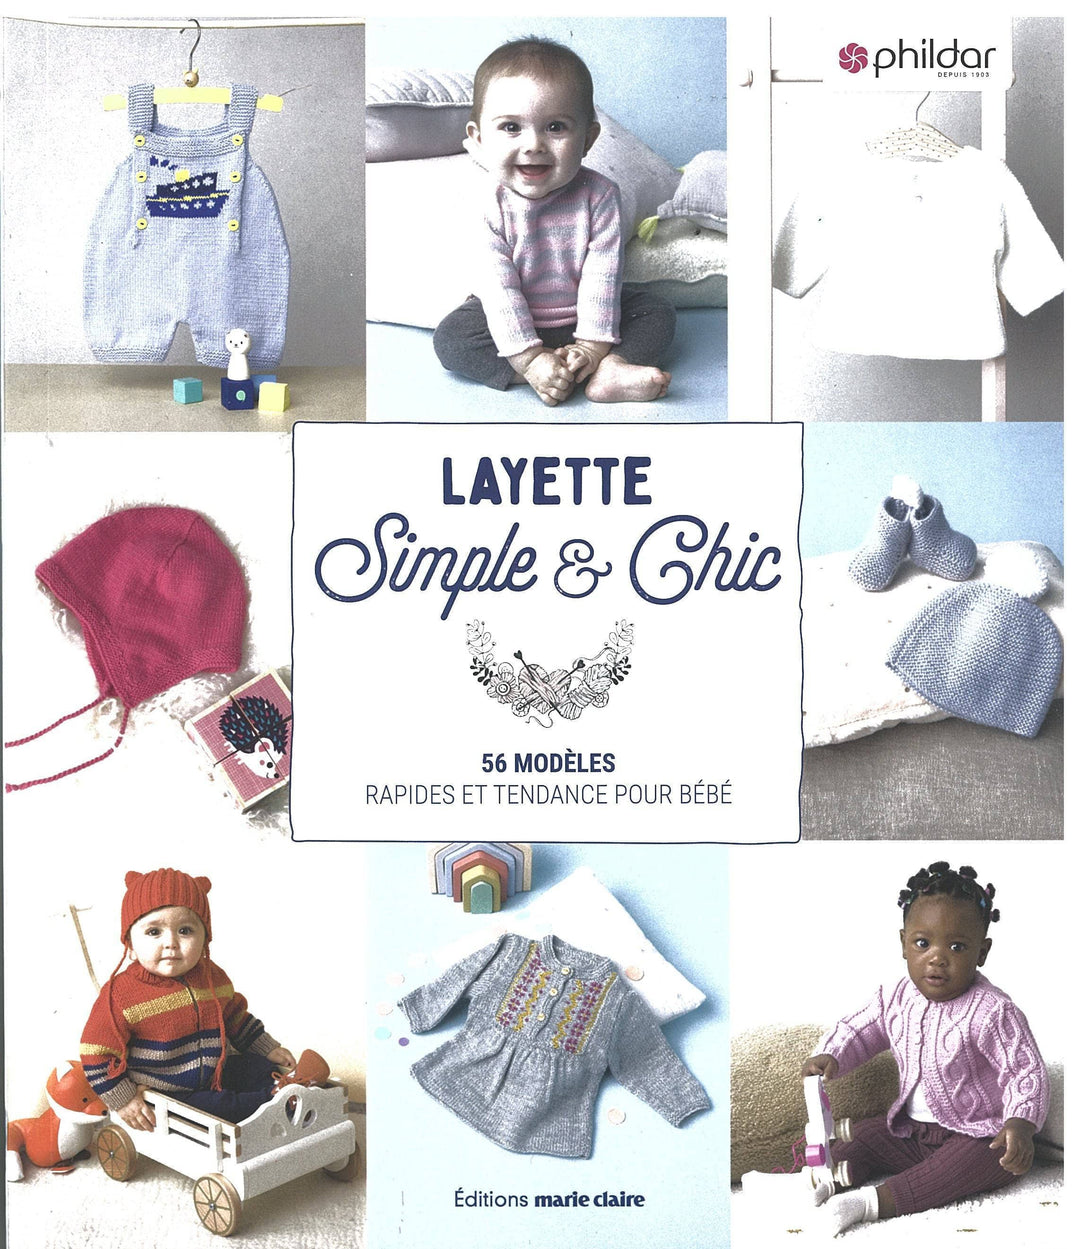 Layette simple & chic